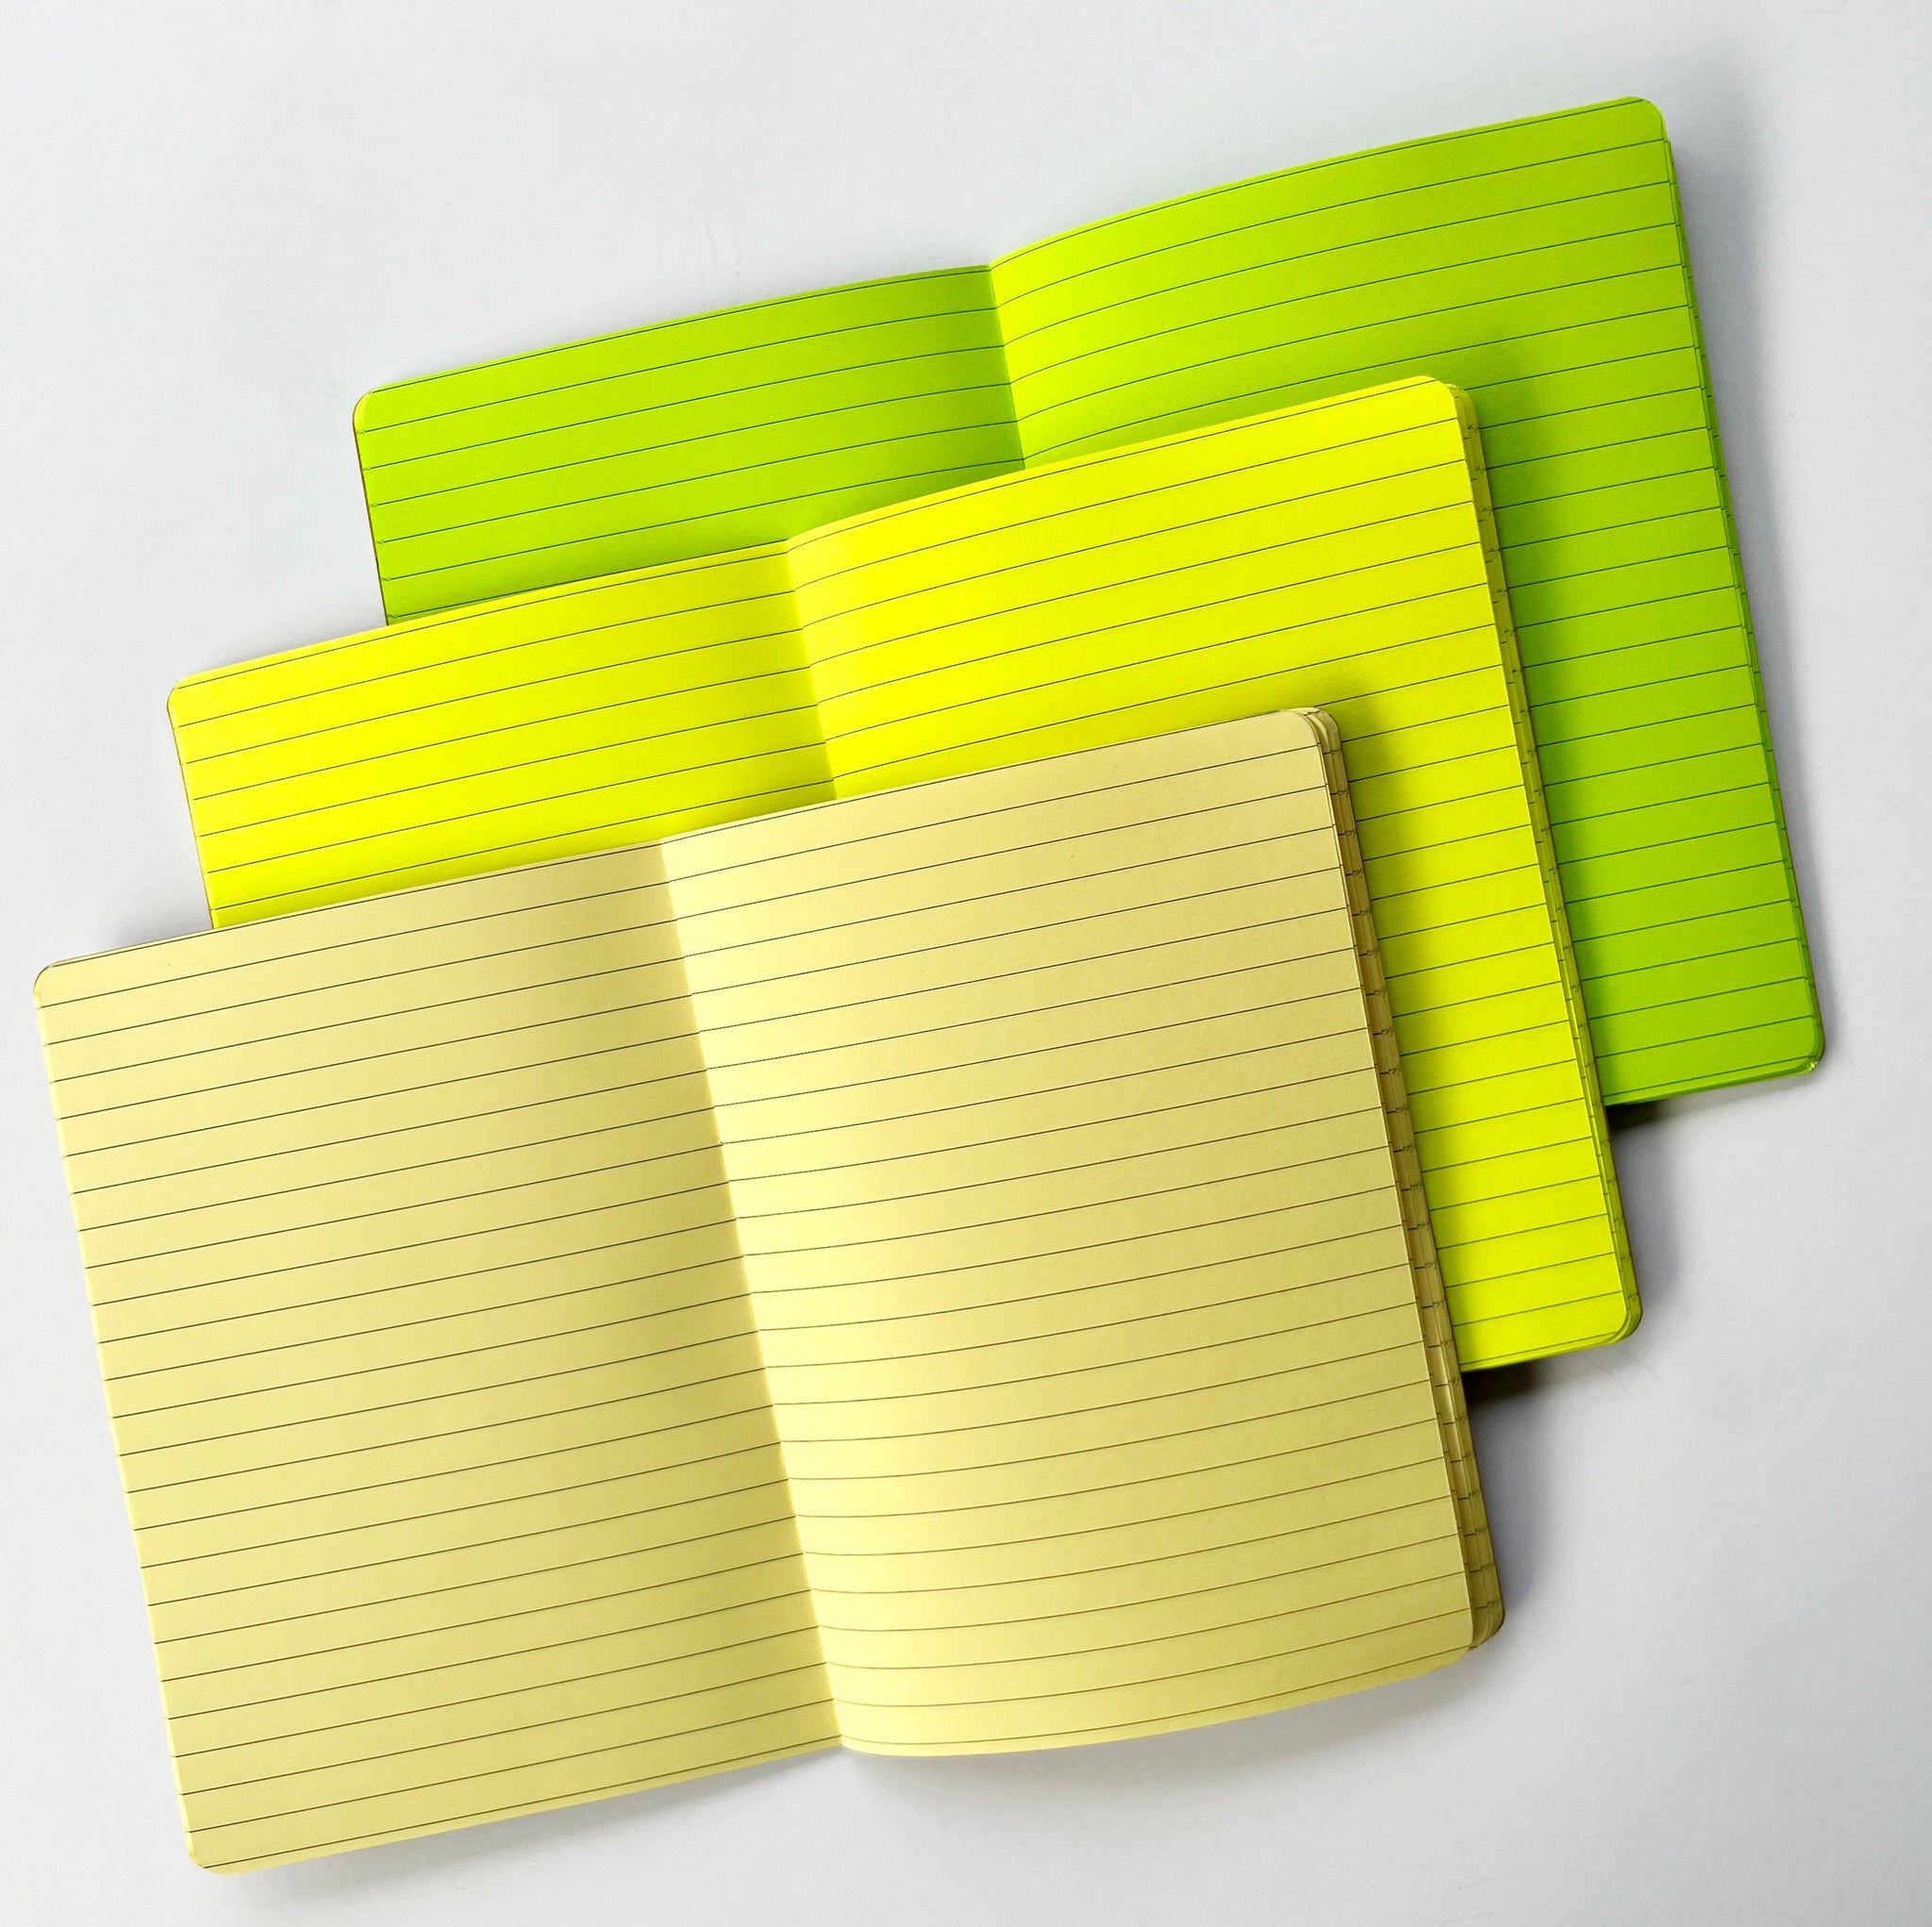 TRAVELERS NOTEBOOK INSERTS – Yellow Paper House